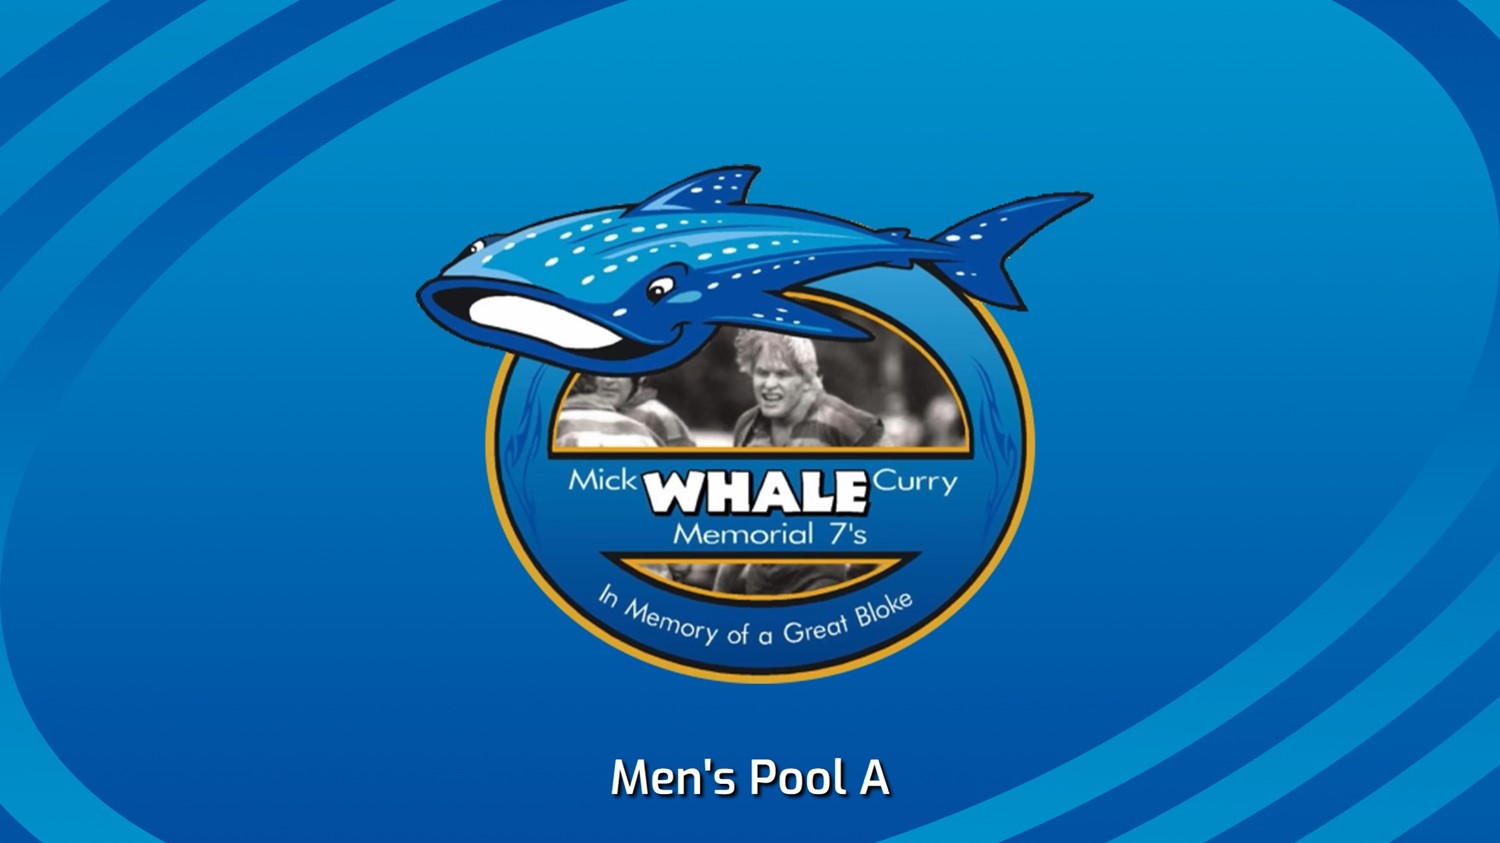 240210-Mick "Whale" Curry Memorial Rugby Sevens Men's Pool A - Two Blues v Warringah Minigame Slate Image